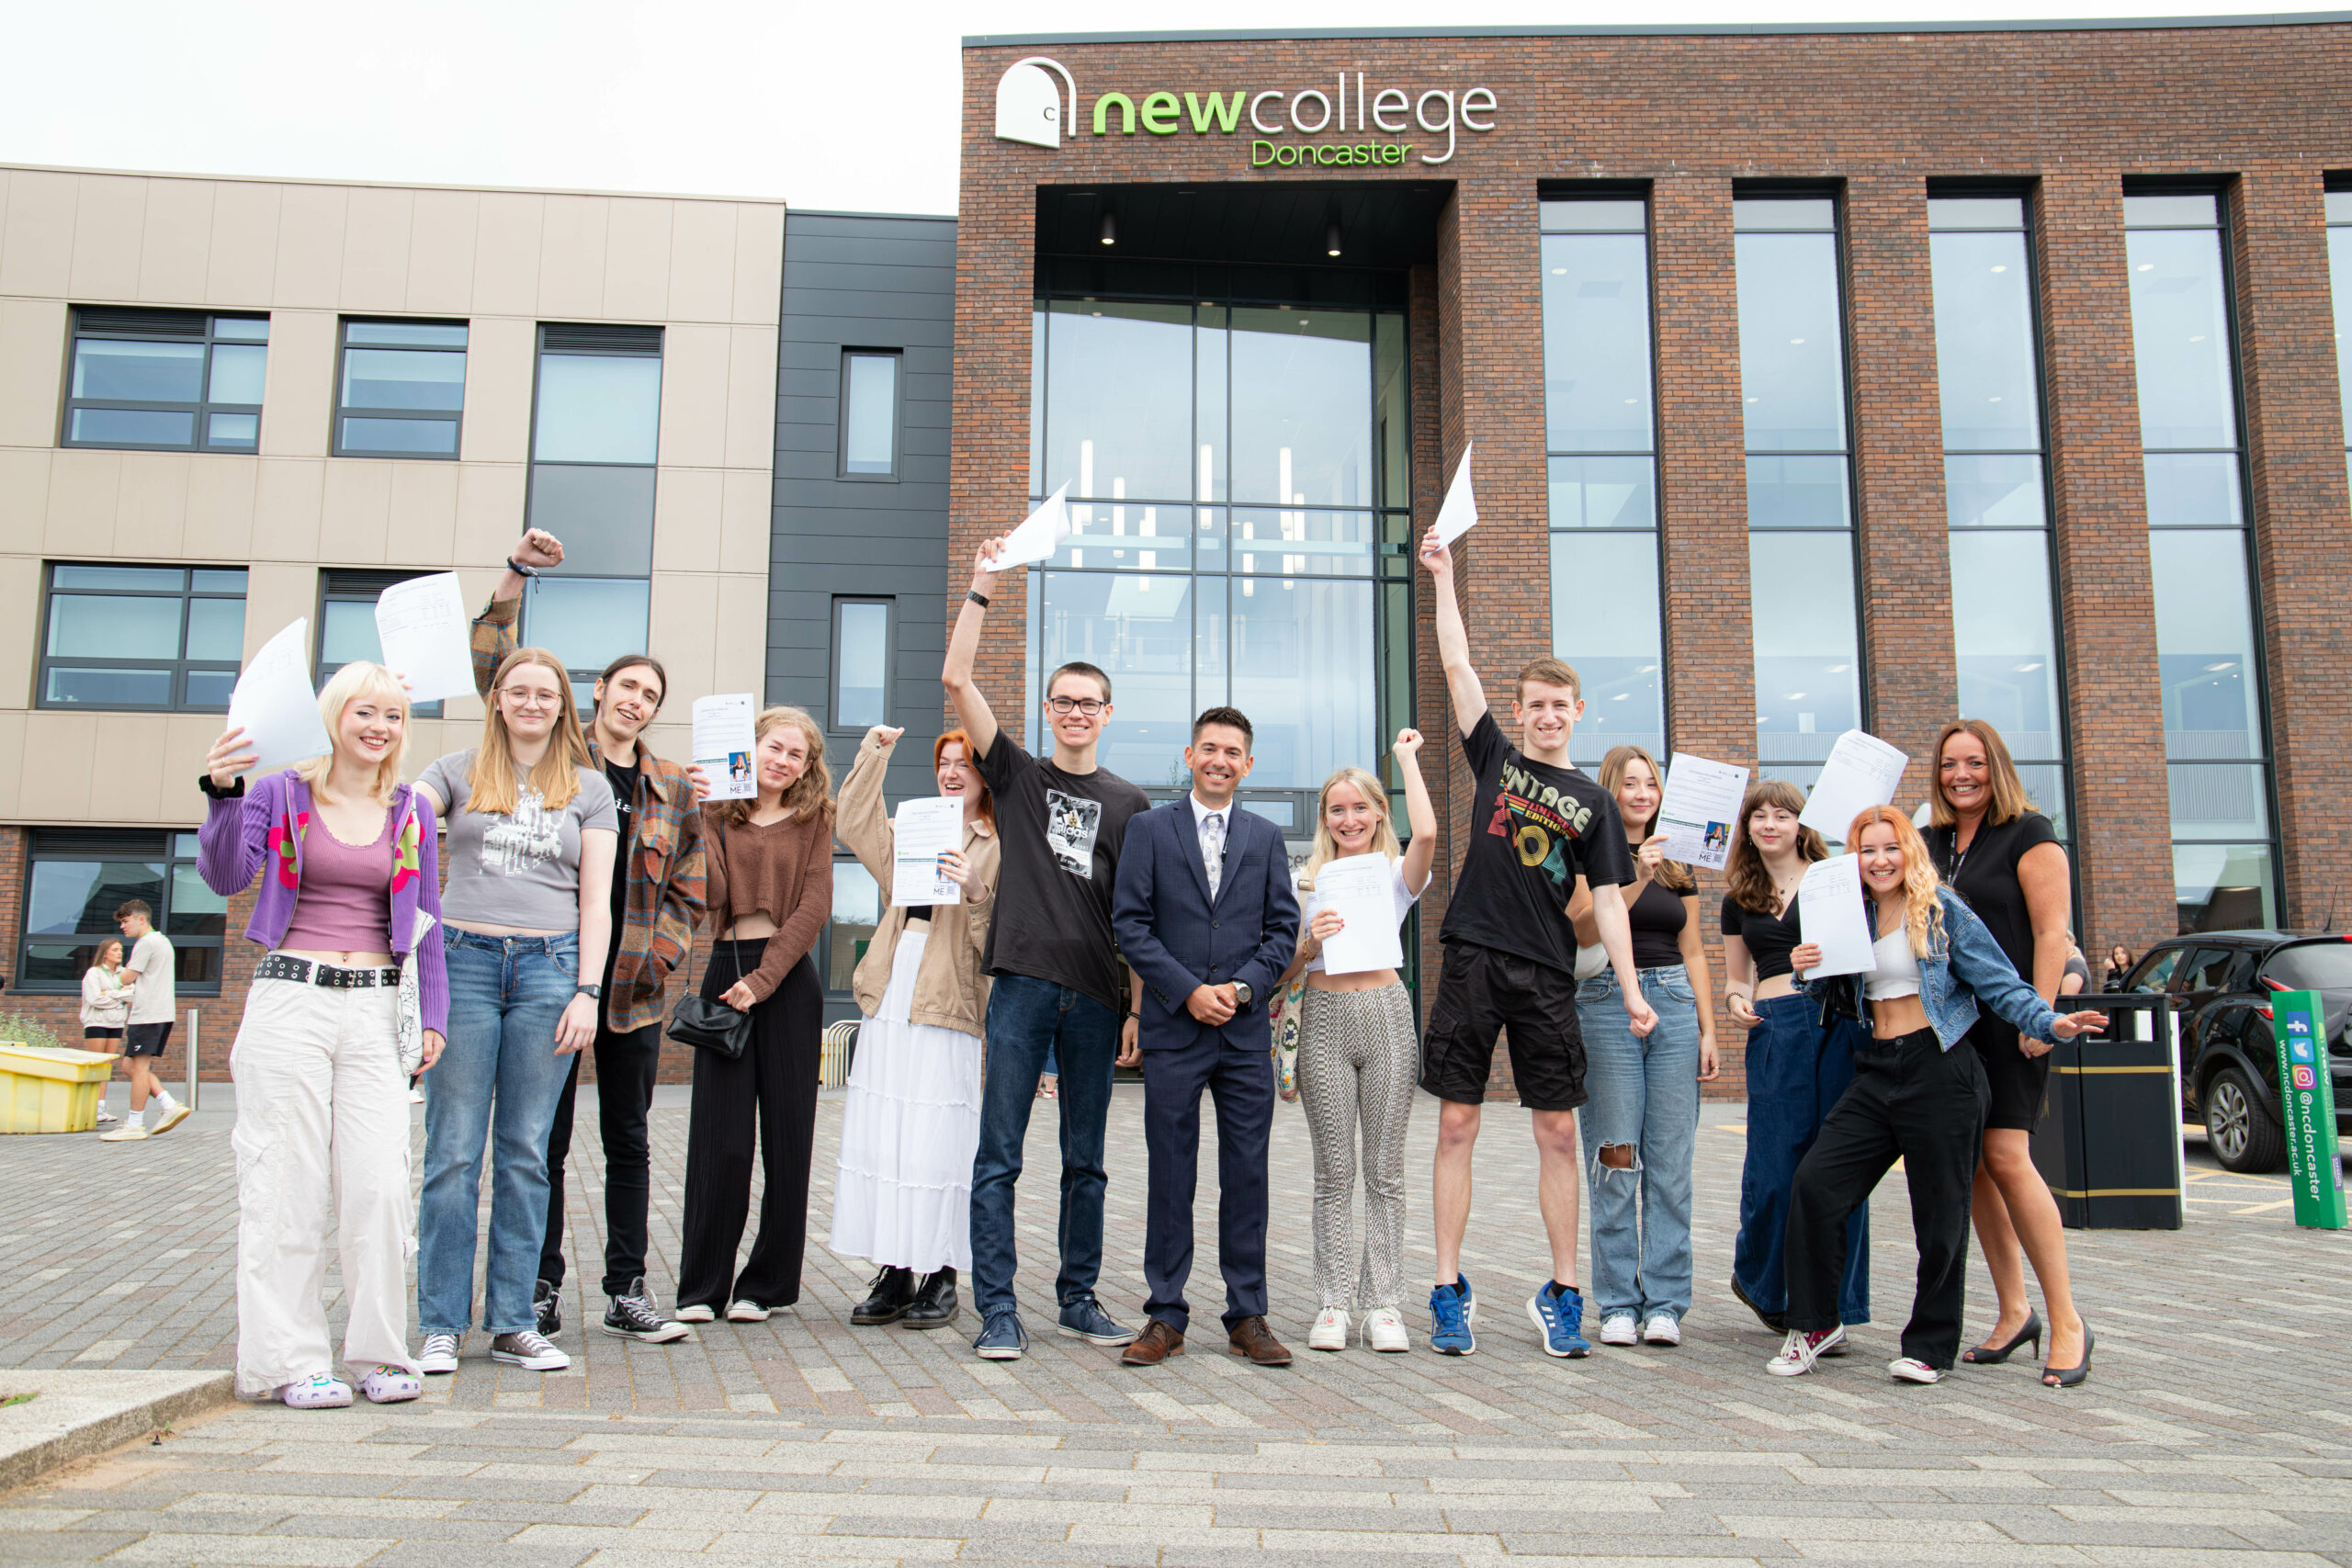 New College students achieve excellent results again in line with pre-Covid figures 